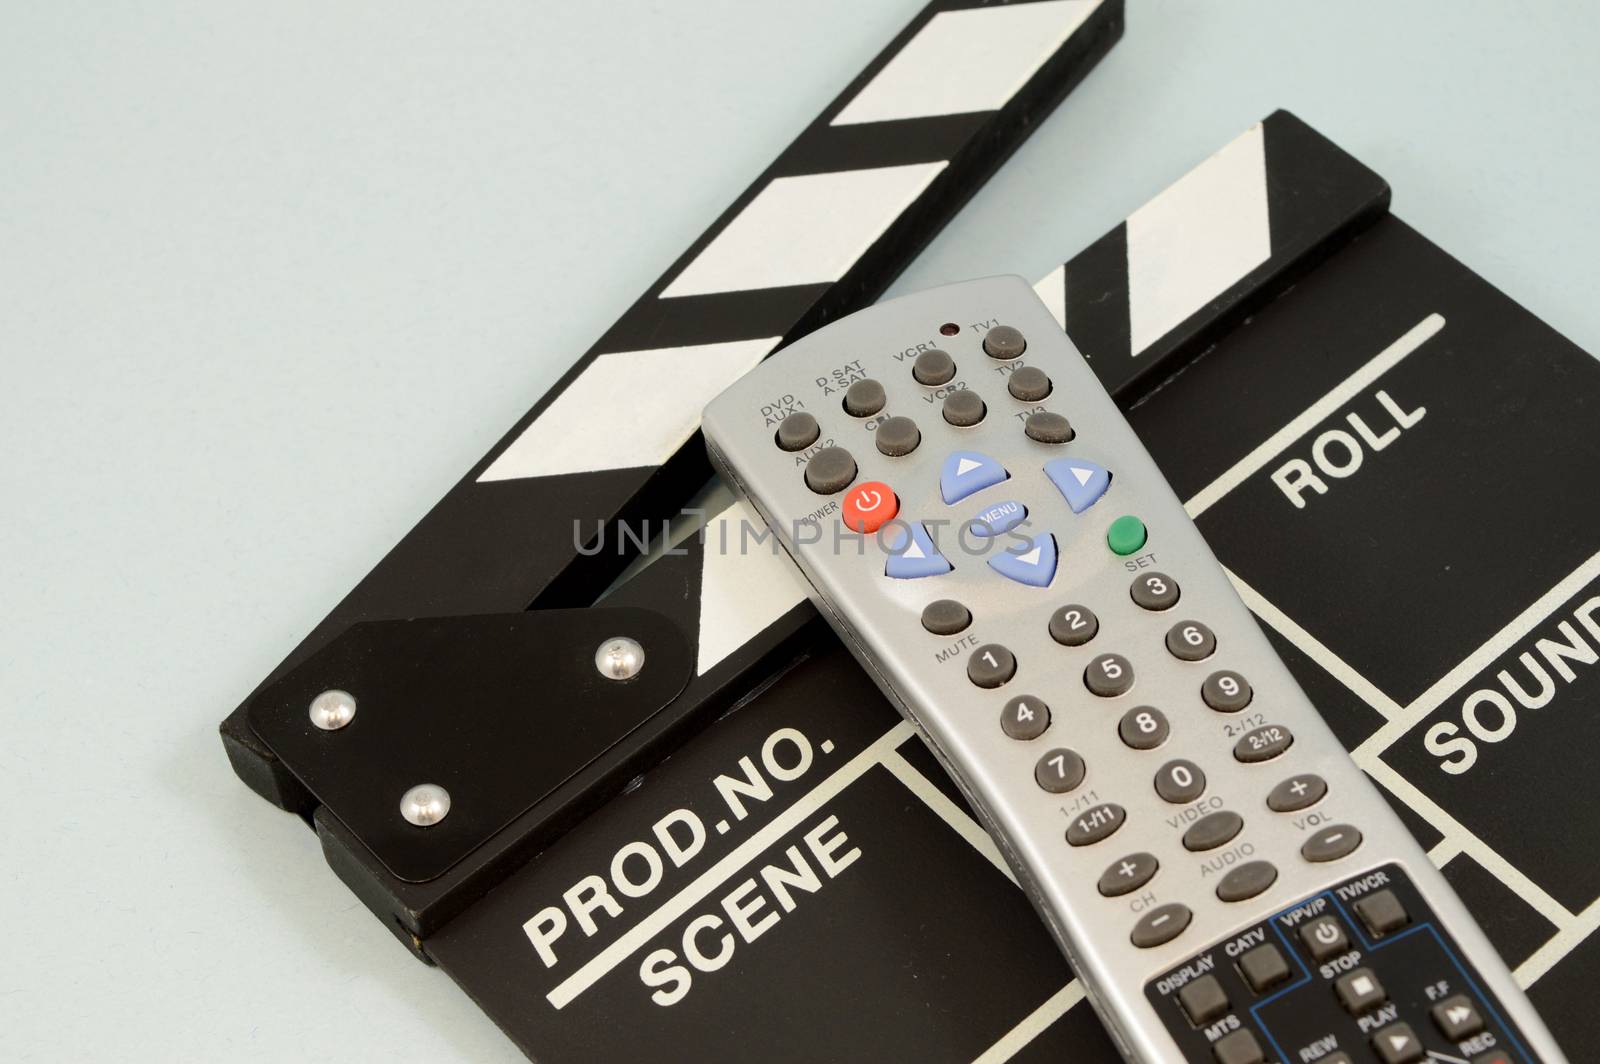 A closeup view of a remote control and directors clapboard for the entertainment industry.